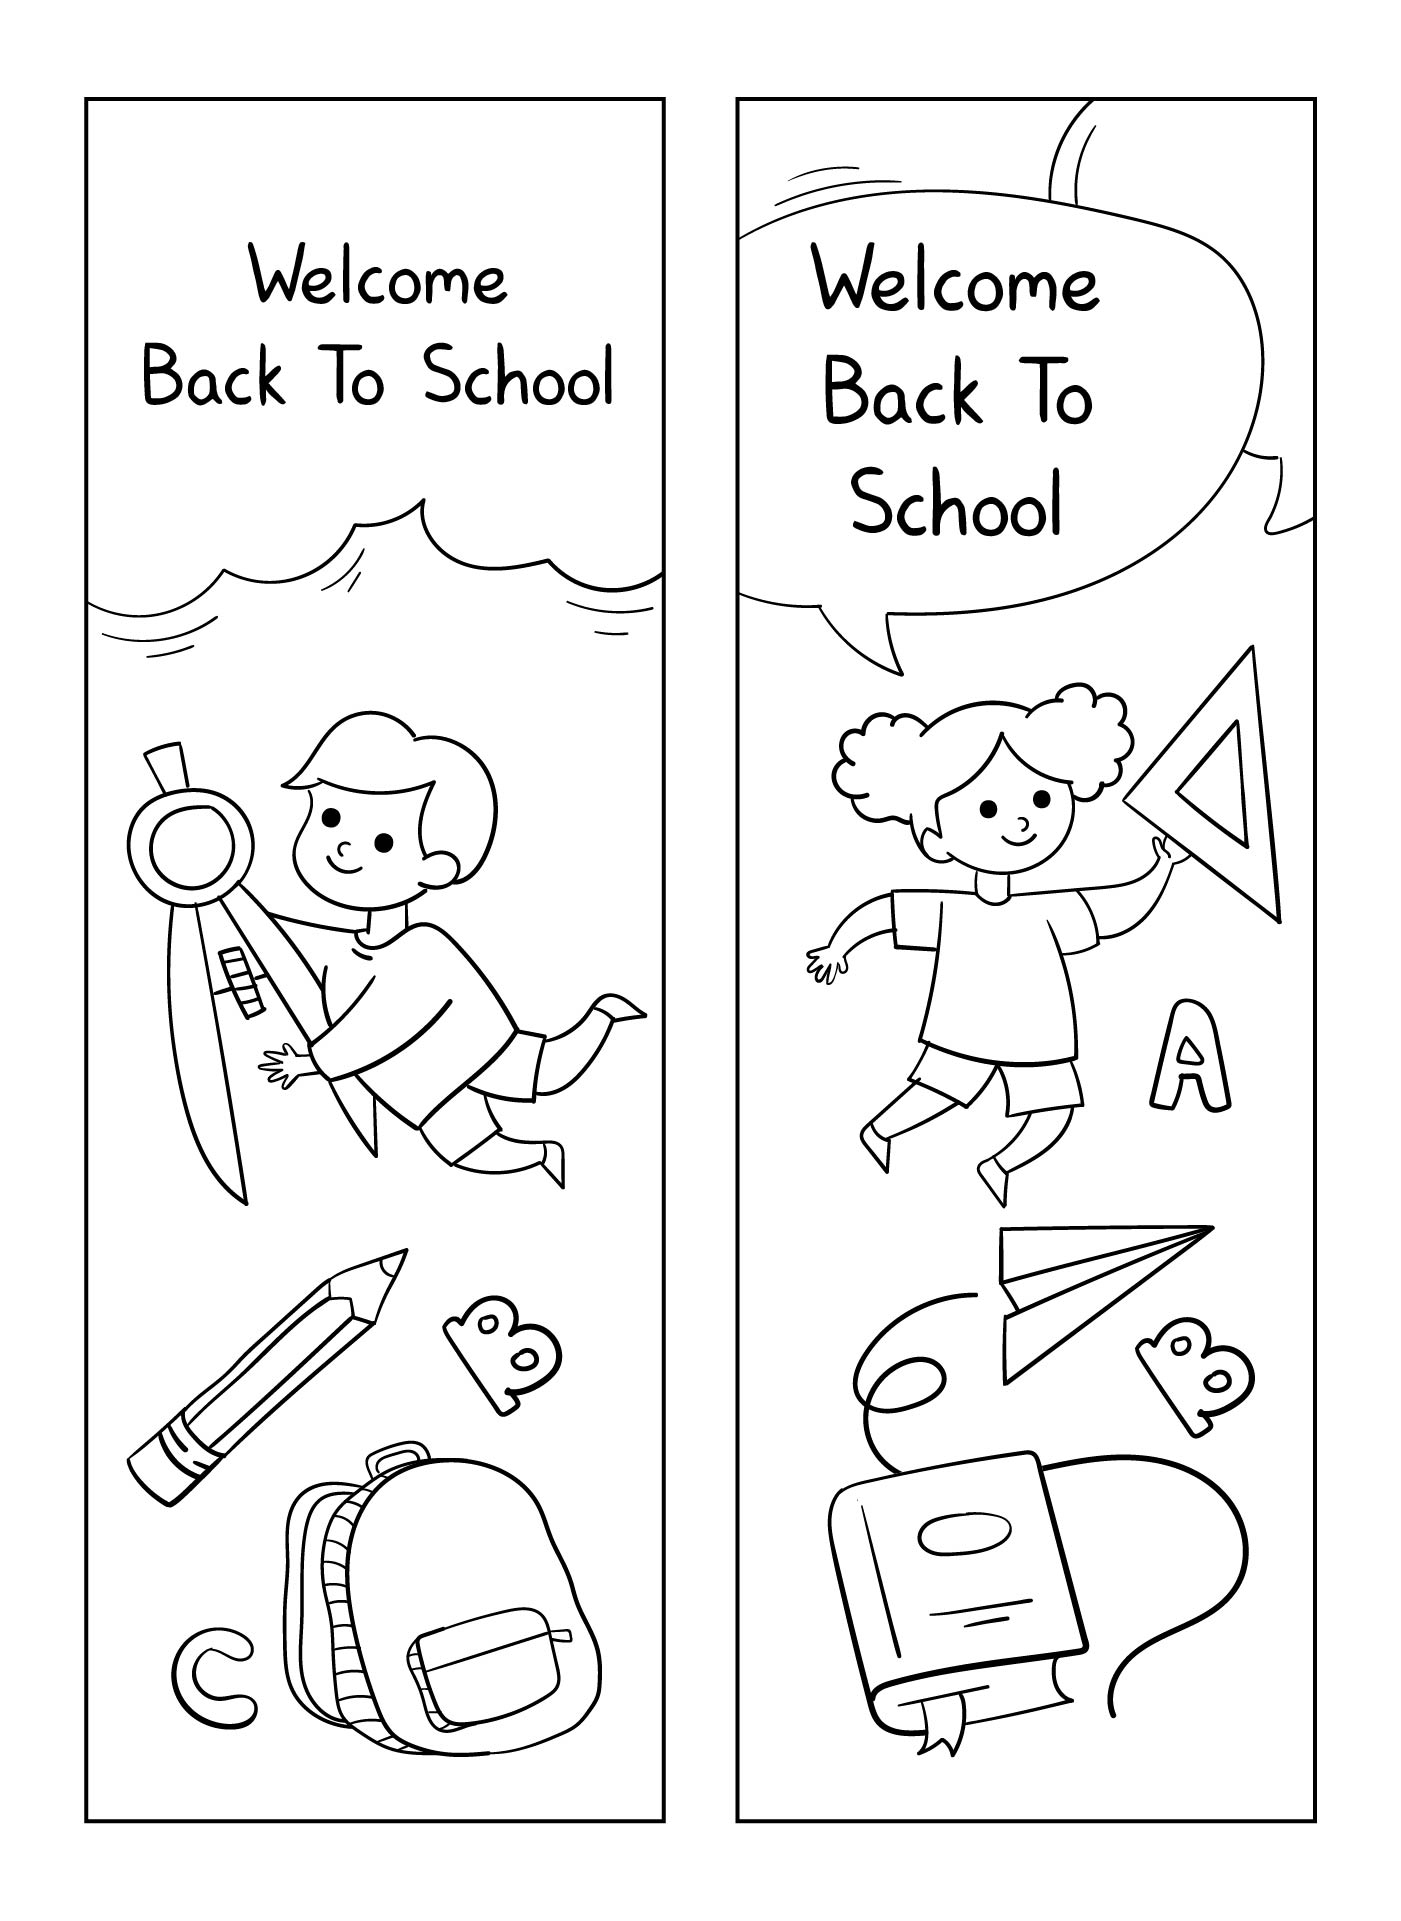 Printable Welcome Back To School Bookmarks To Color